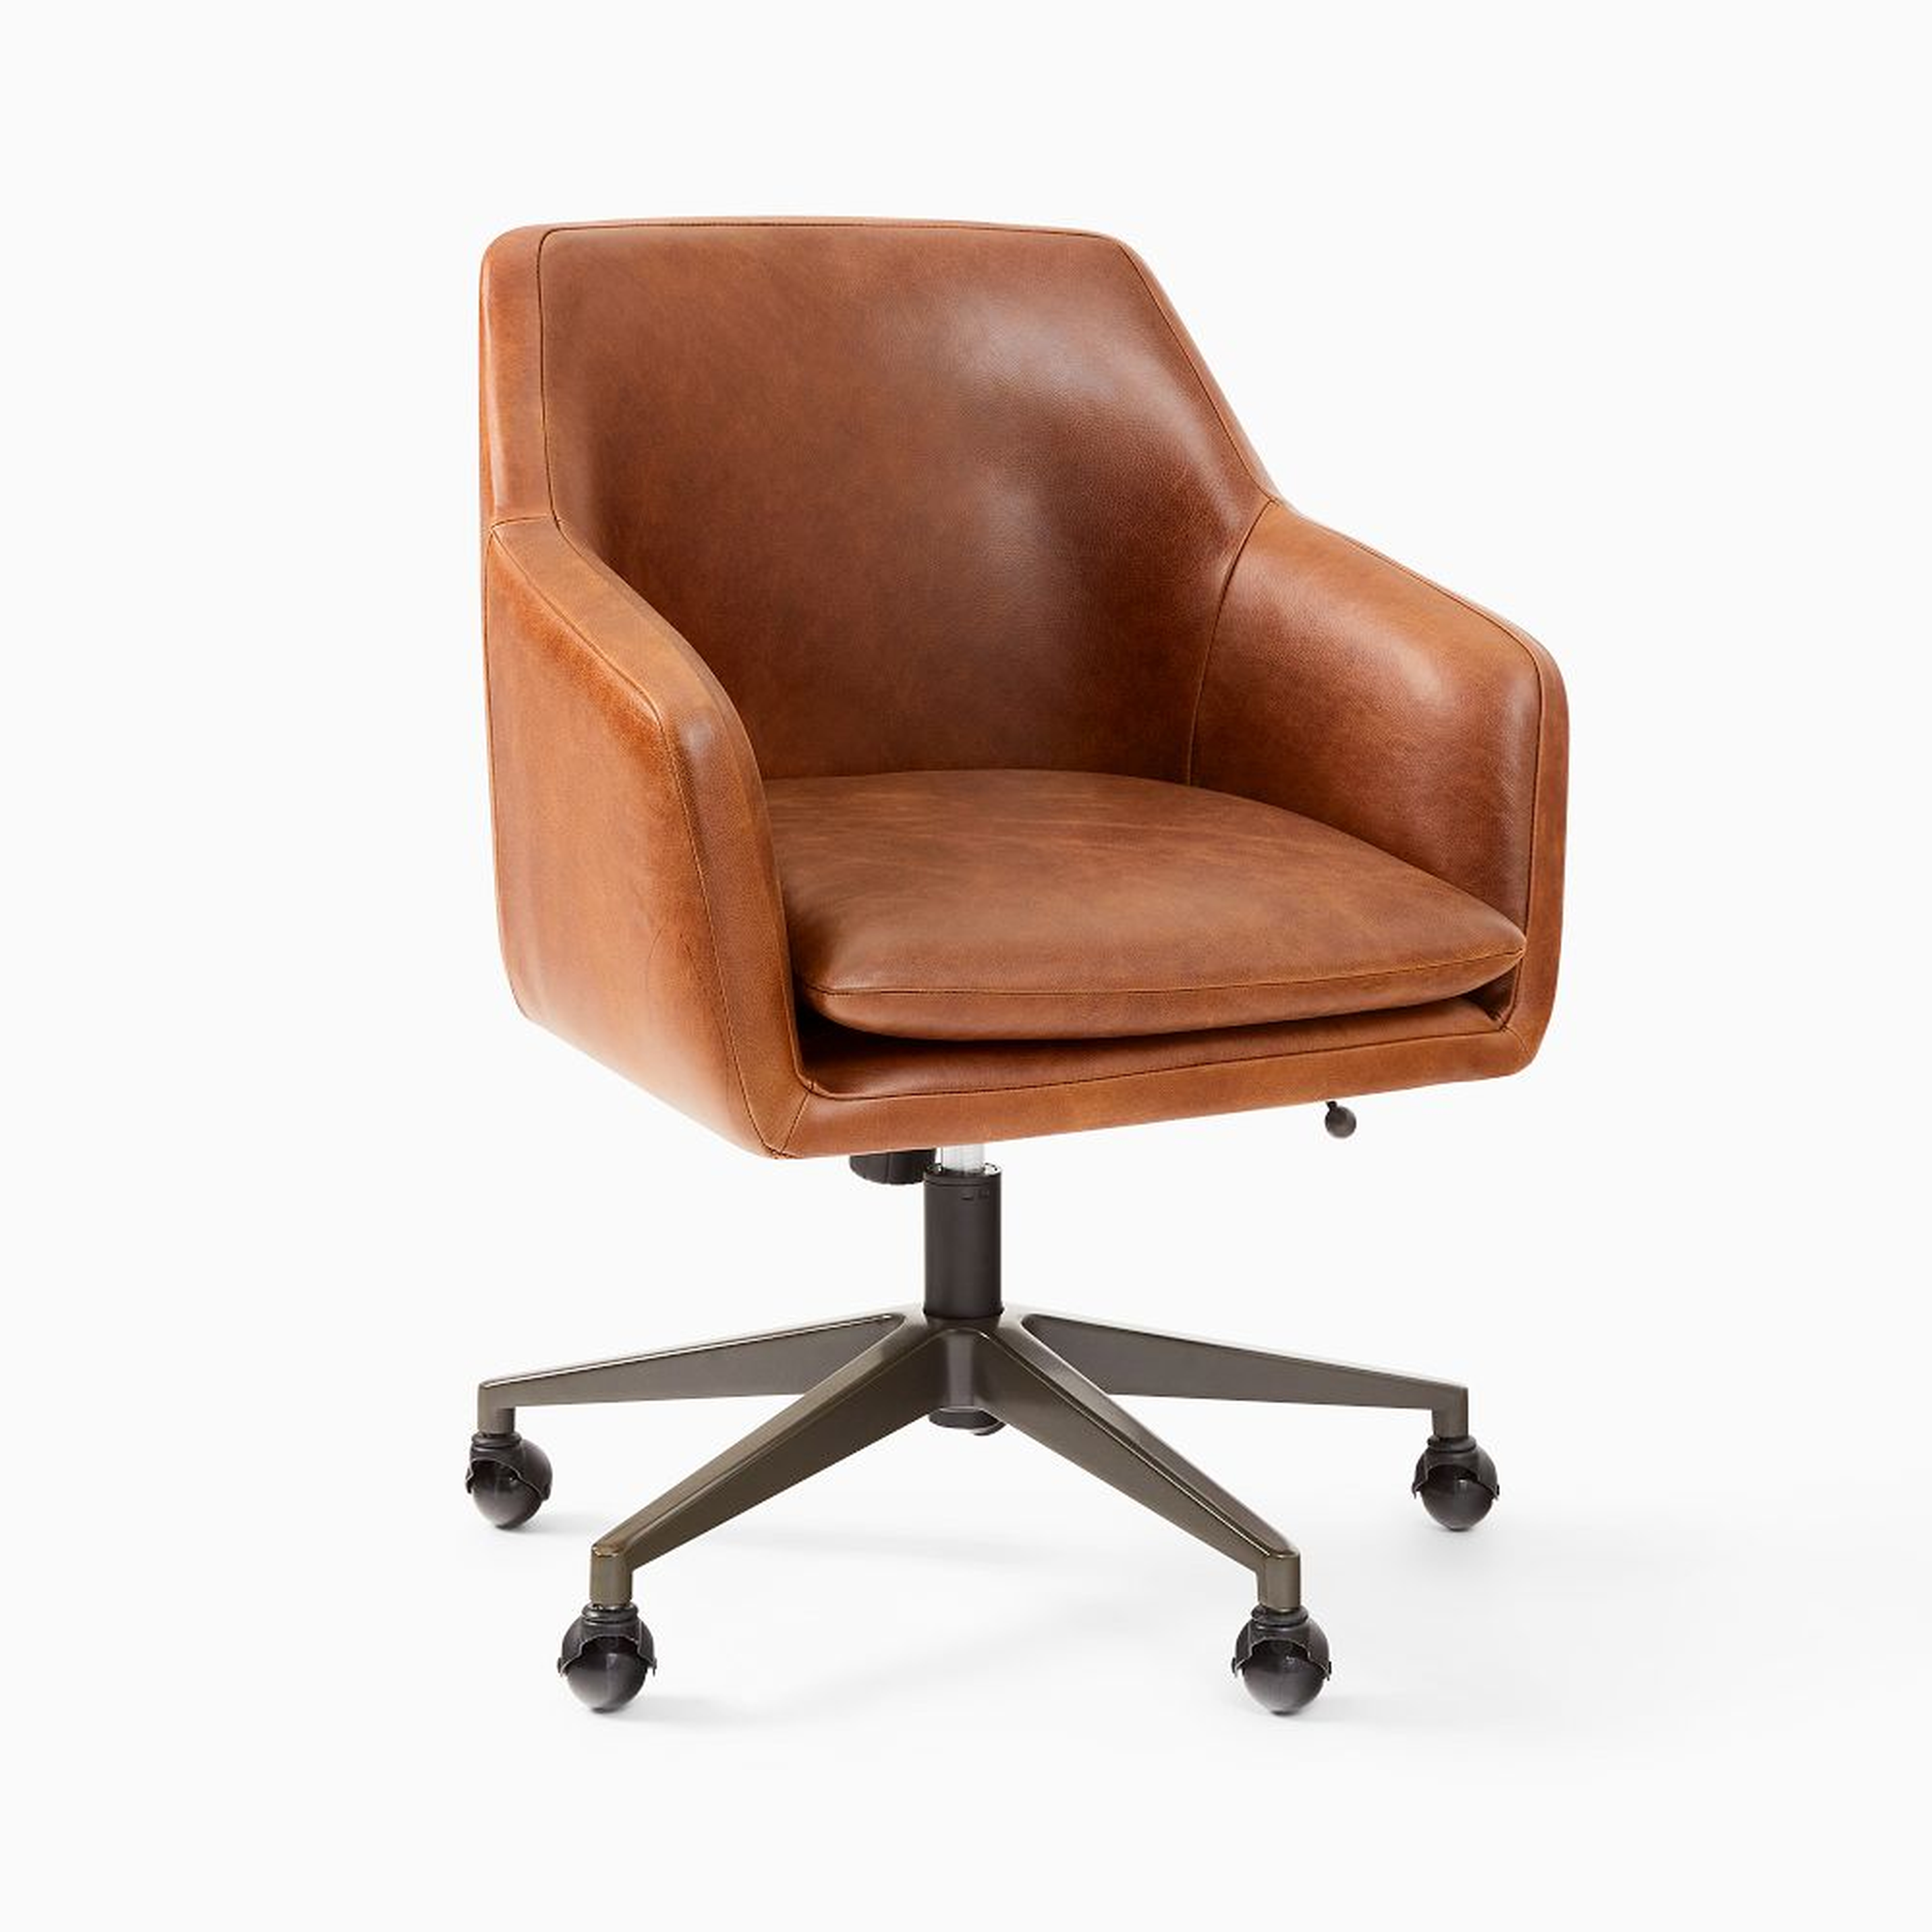 Helvetica Leather Swivel Office Chair - West Elm